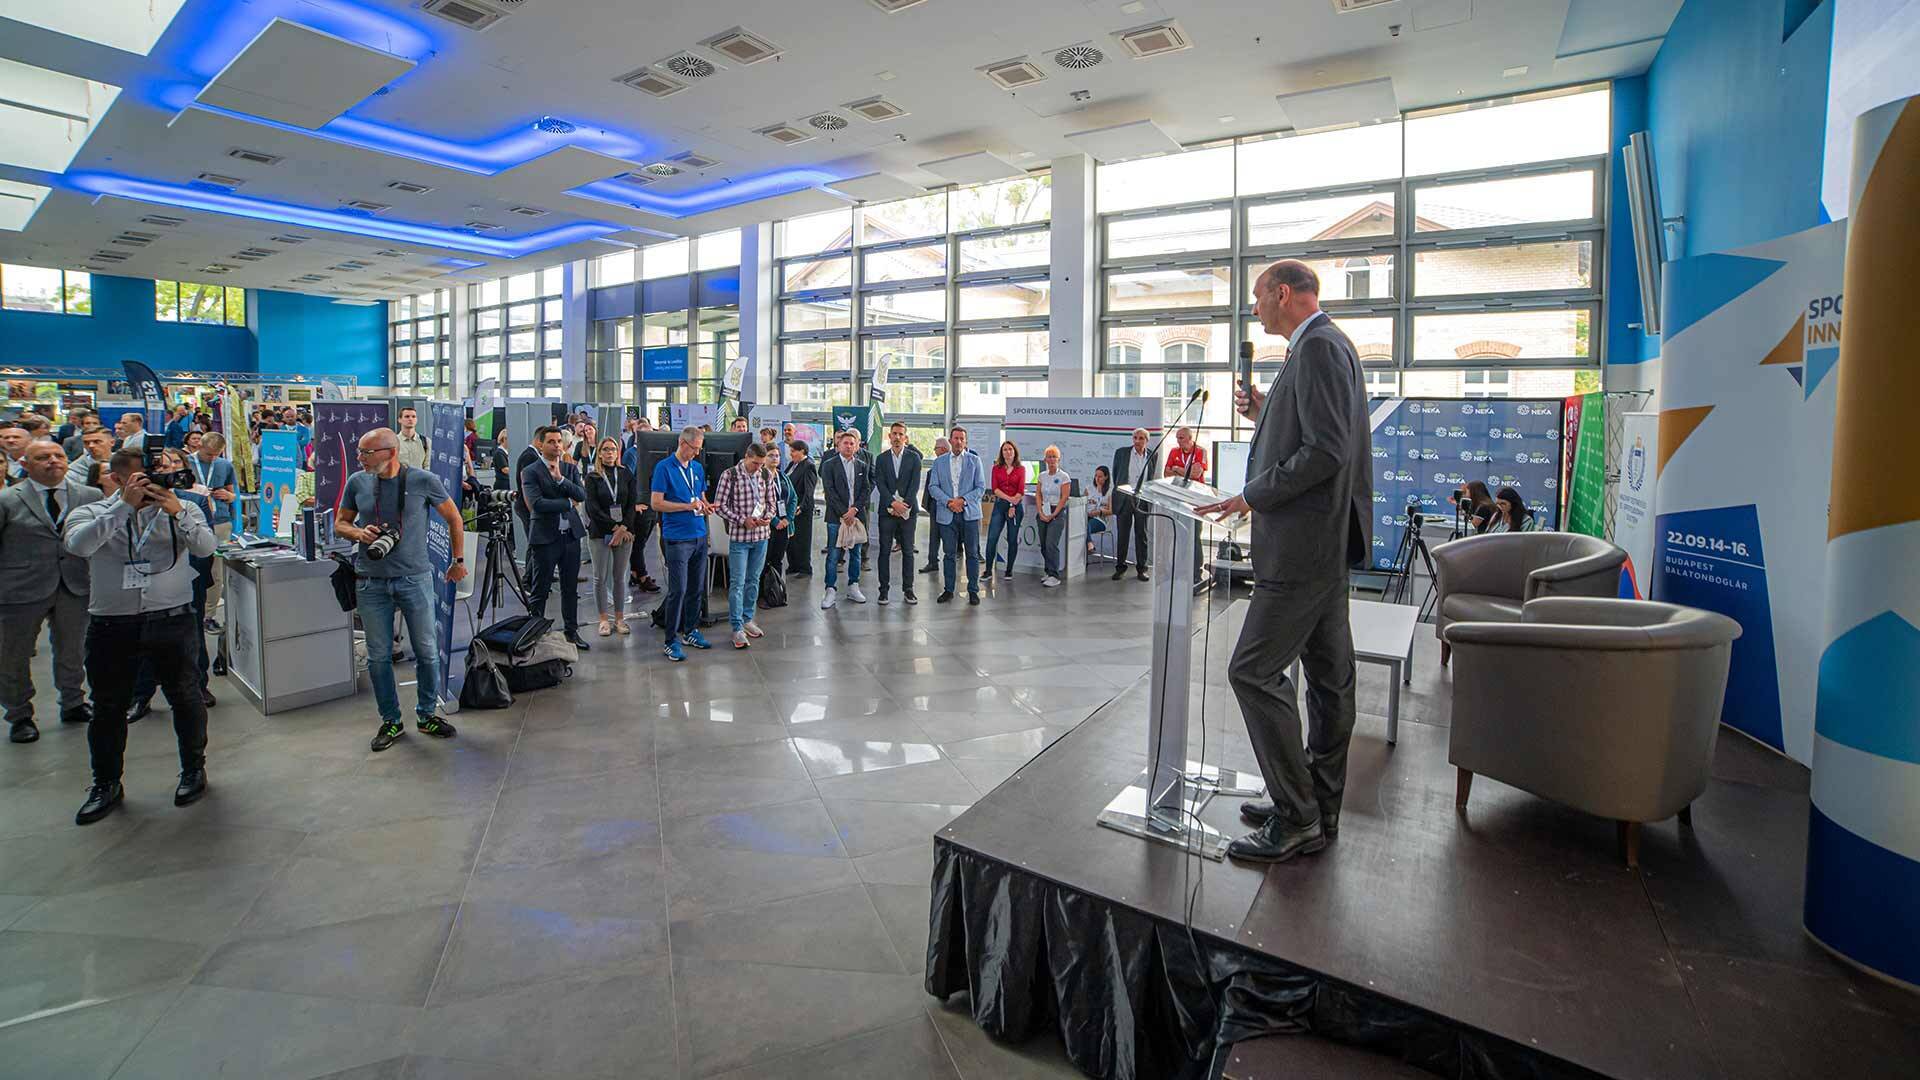 The 5th Sport and Innovation Conference ends with great success